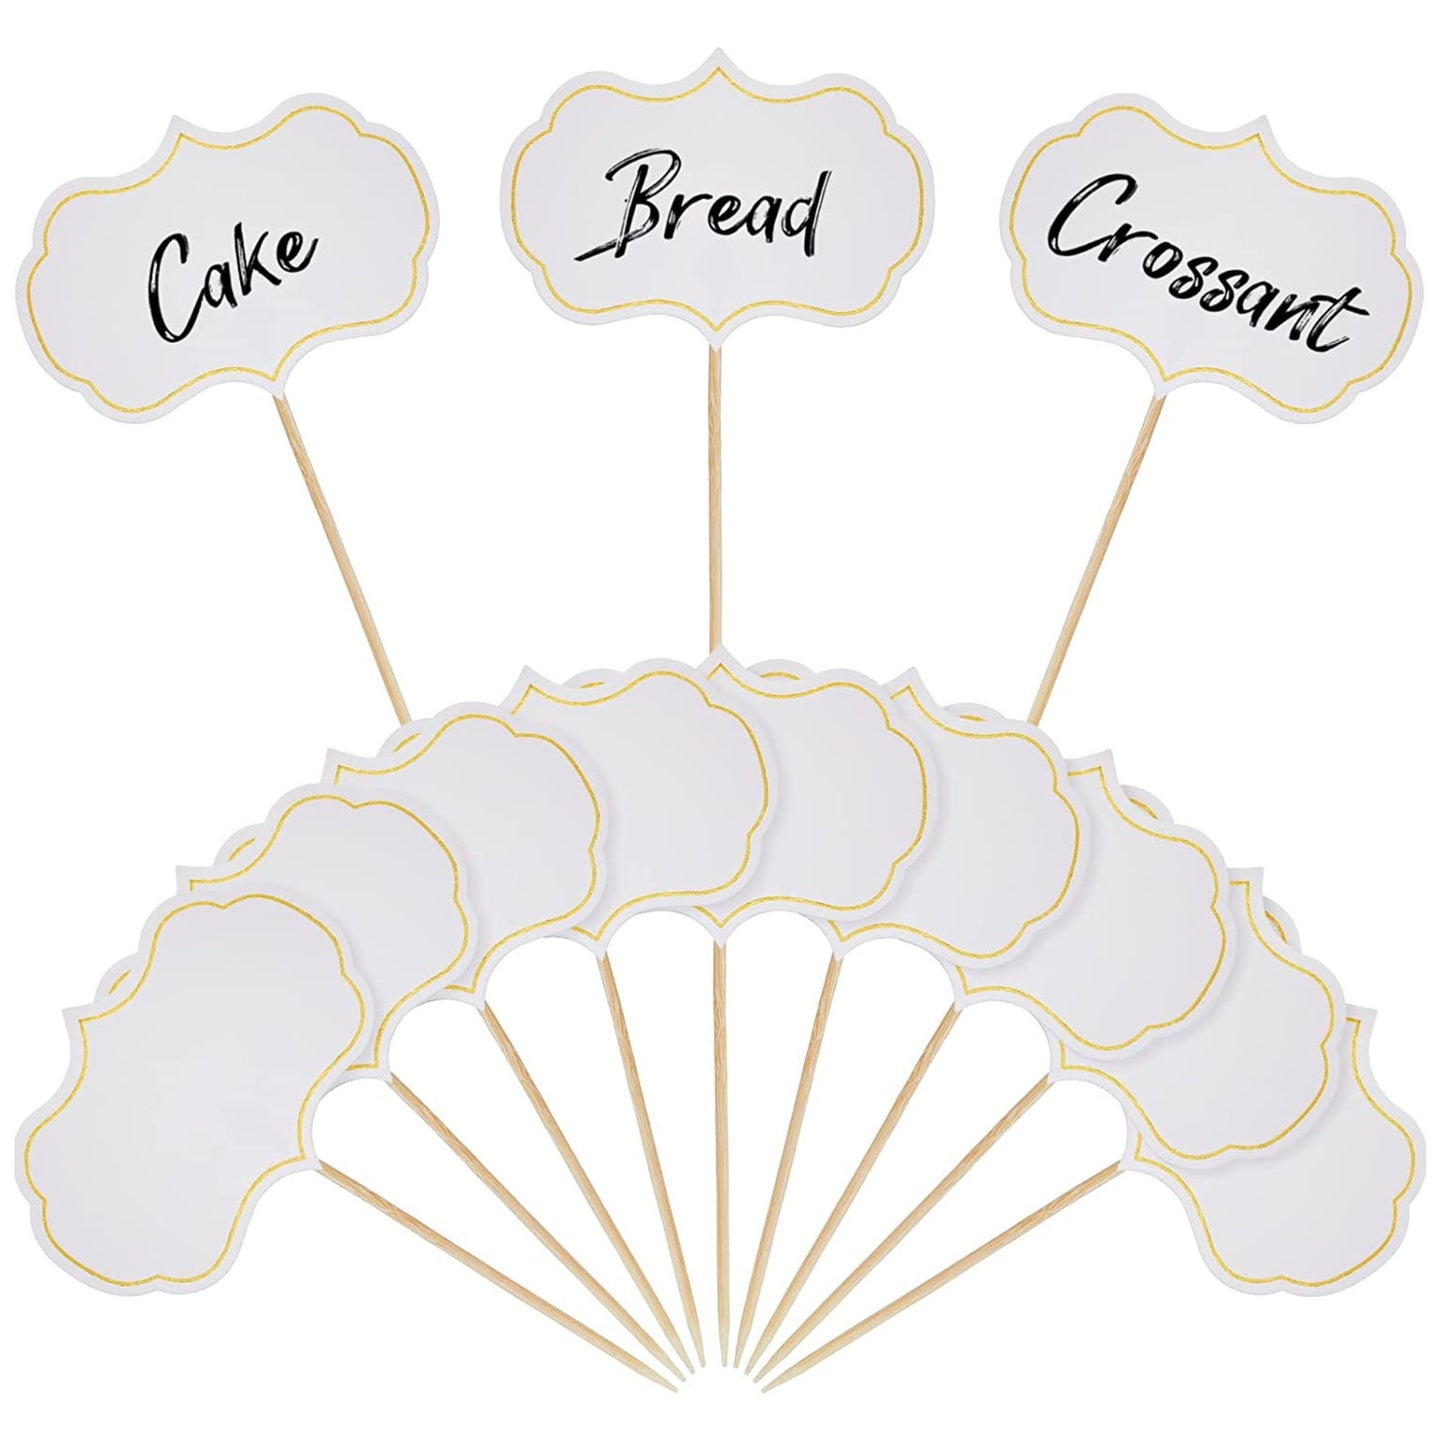 Charming Chalkboard Charcuterie Display Set - 10 Toothpick Signs - Perfect for Weddings, Showers, and Brunches - Food, Cupcake, and Dessert Presentation